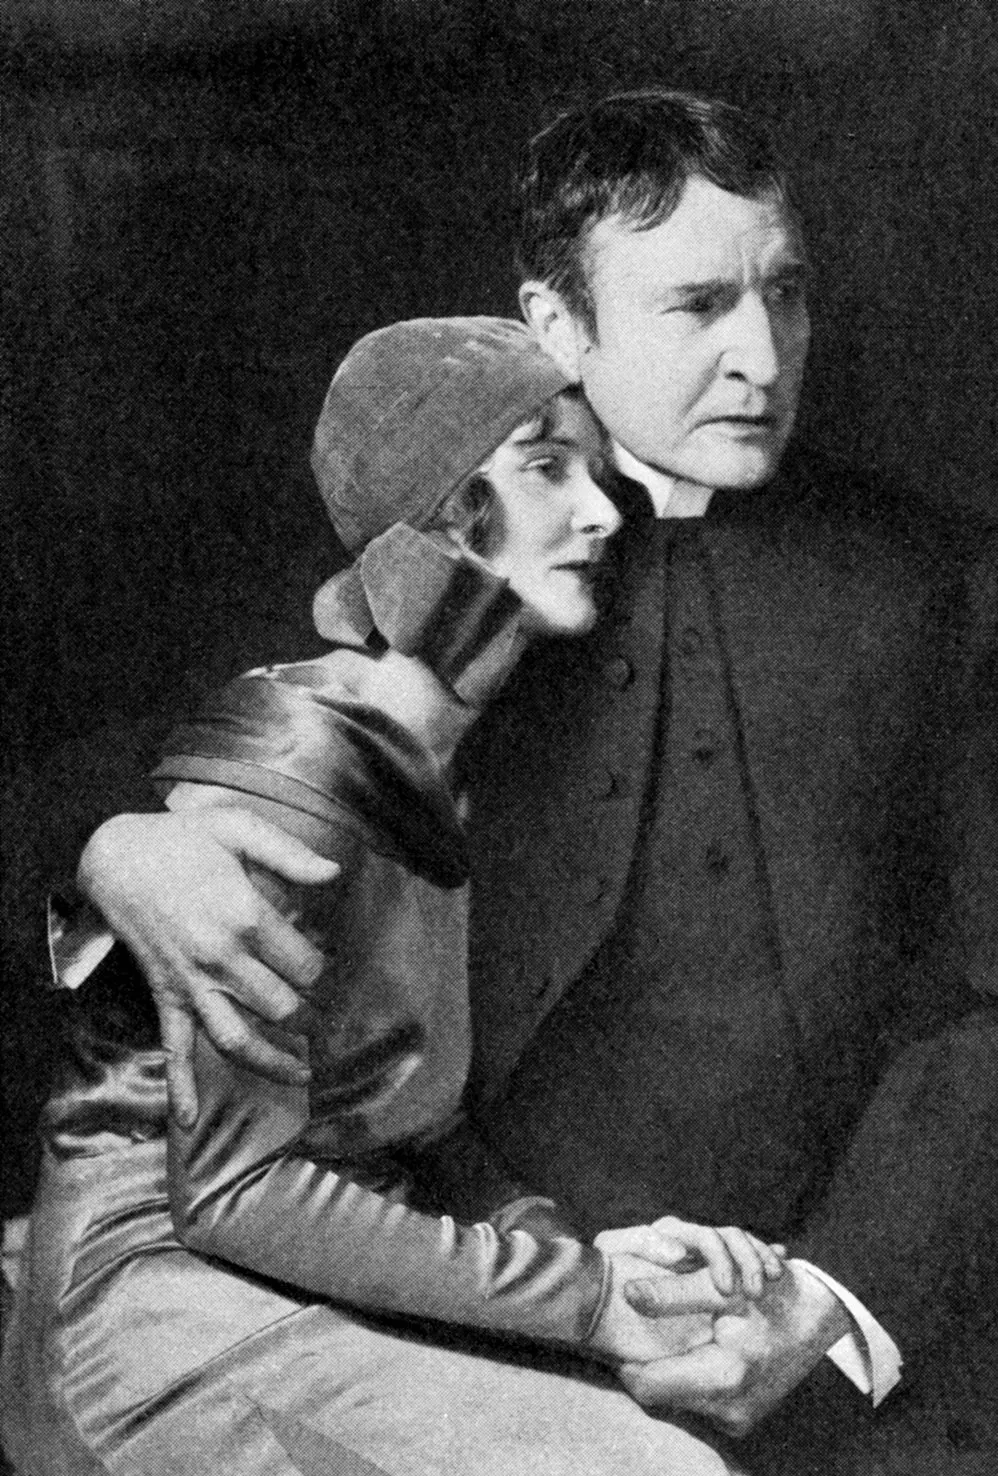 Entwistle and William Gillette in a Broadway production of Sherlock Holmes